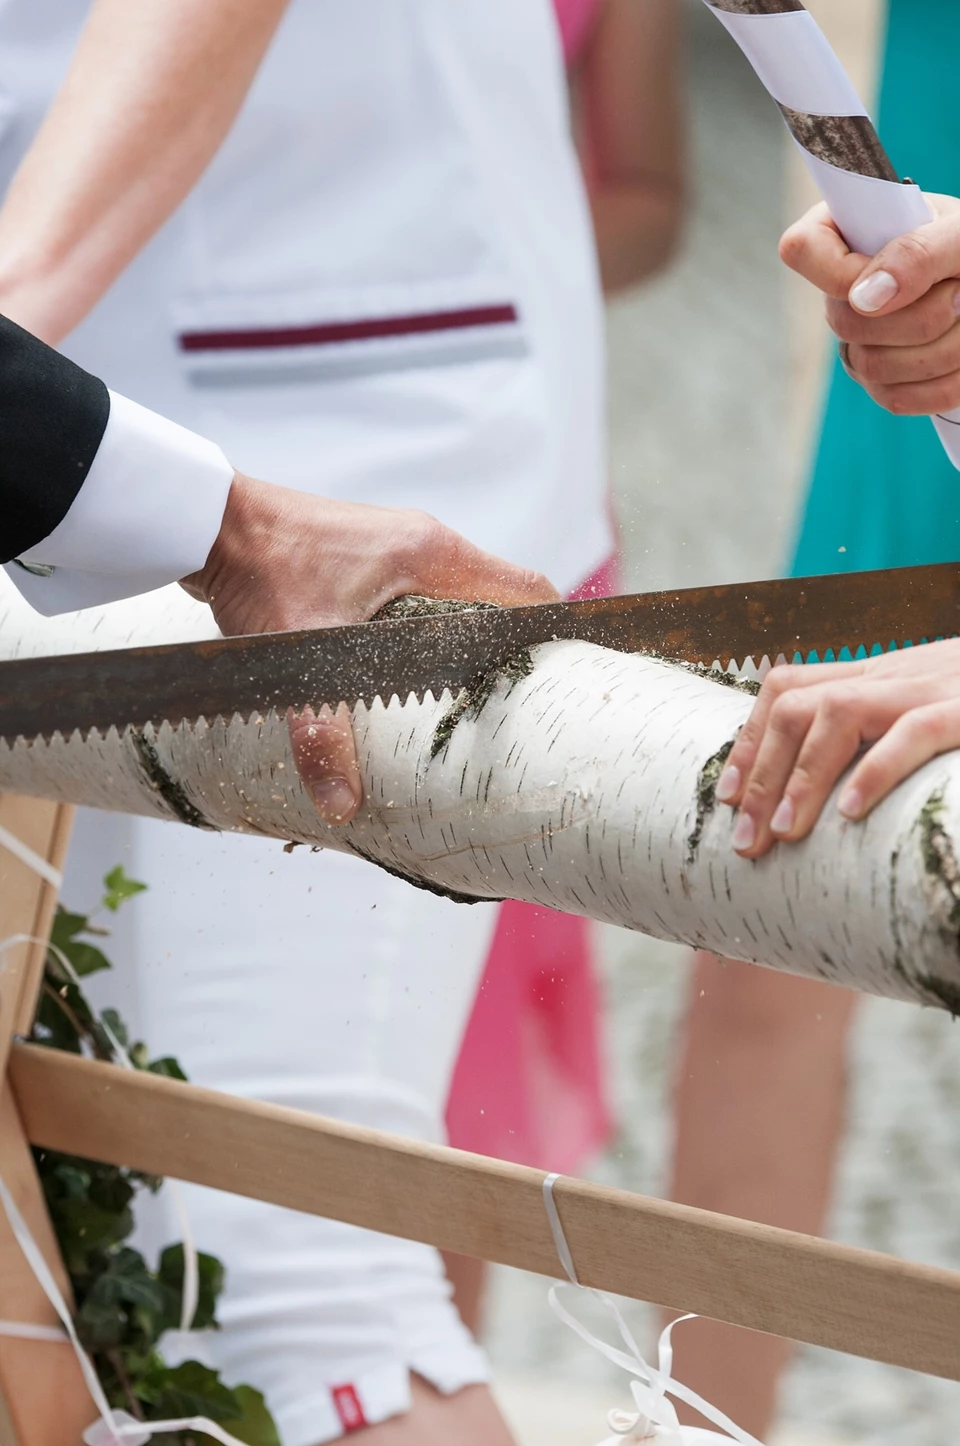 Sawing the tree trunk symbolizes the cooperation and unity of the bride and groom.